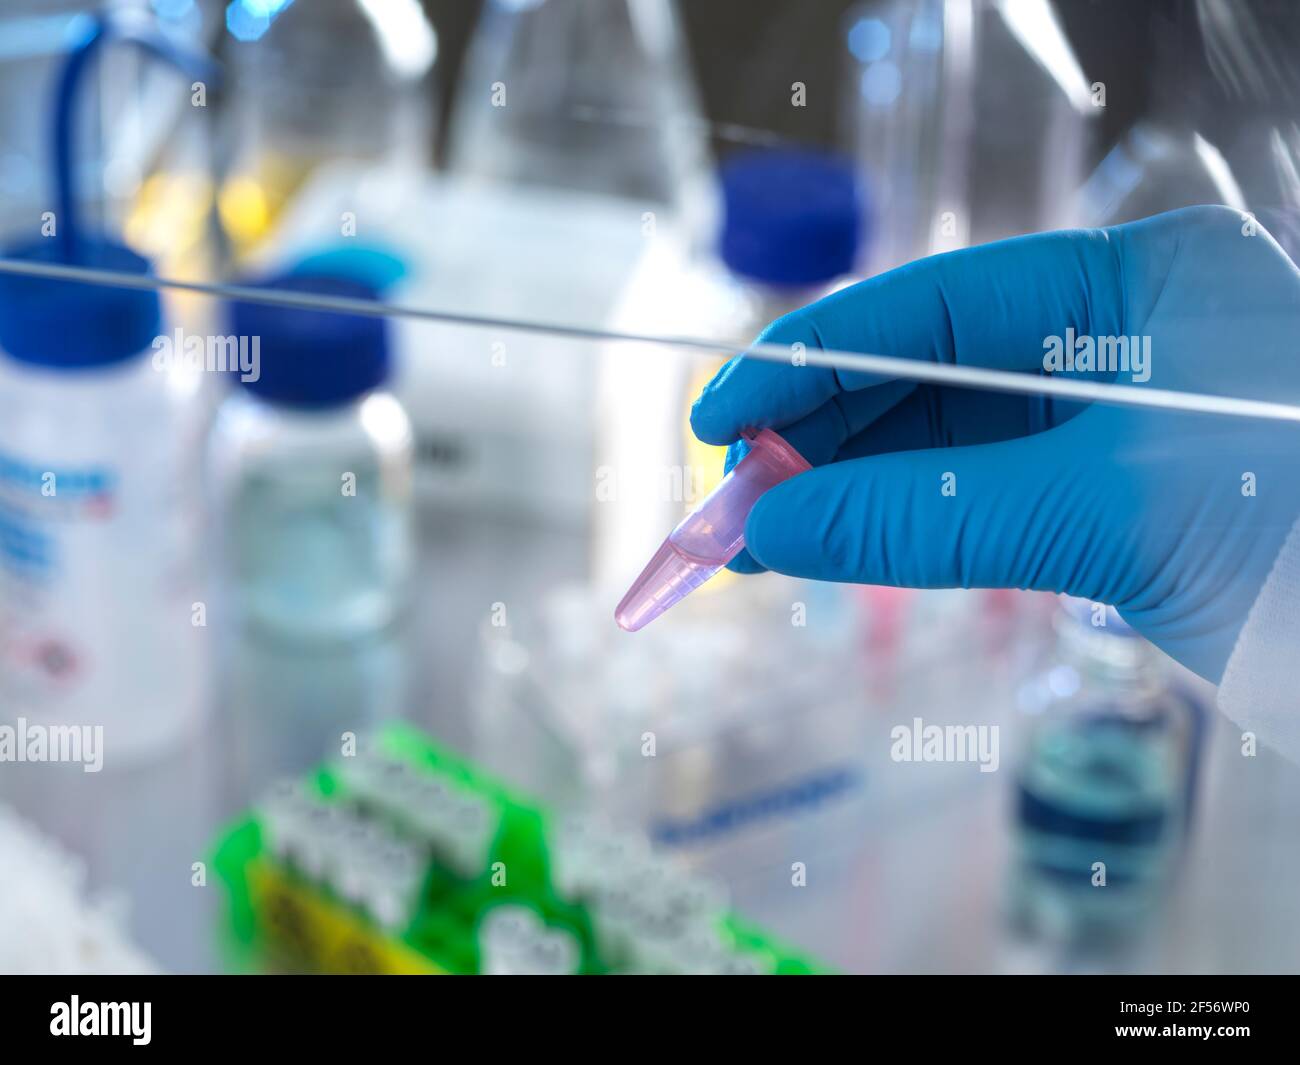 Scientist holding vial containing chemical formula ready for analysis in fume hood Stock Photo